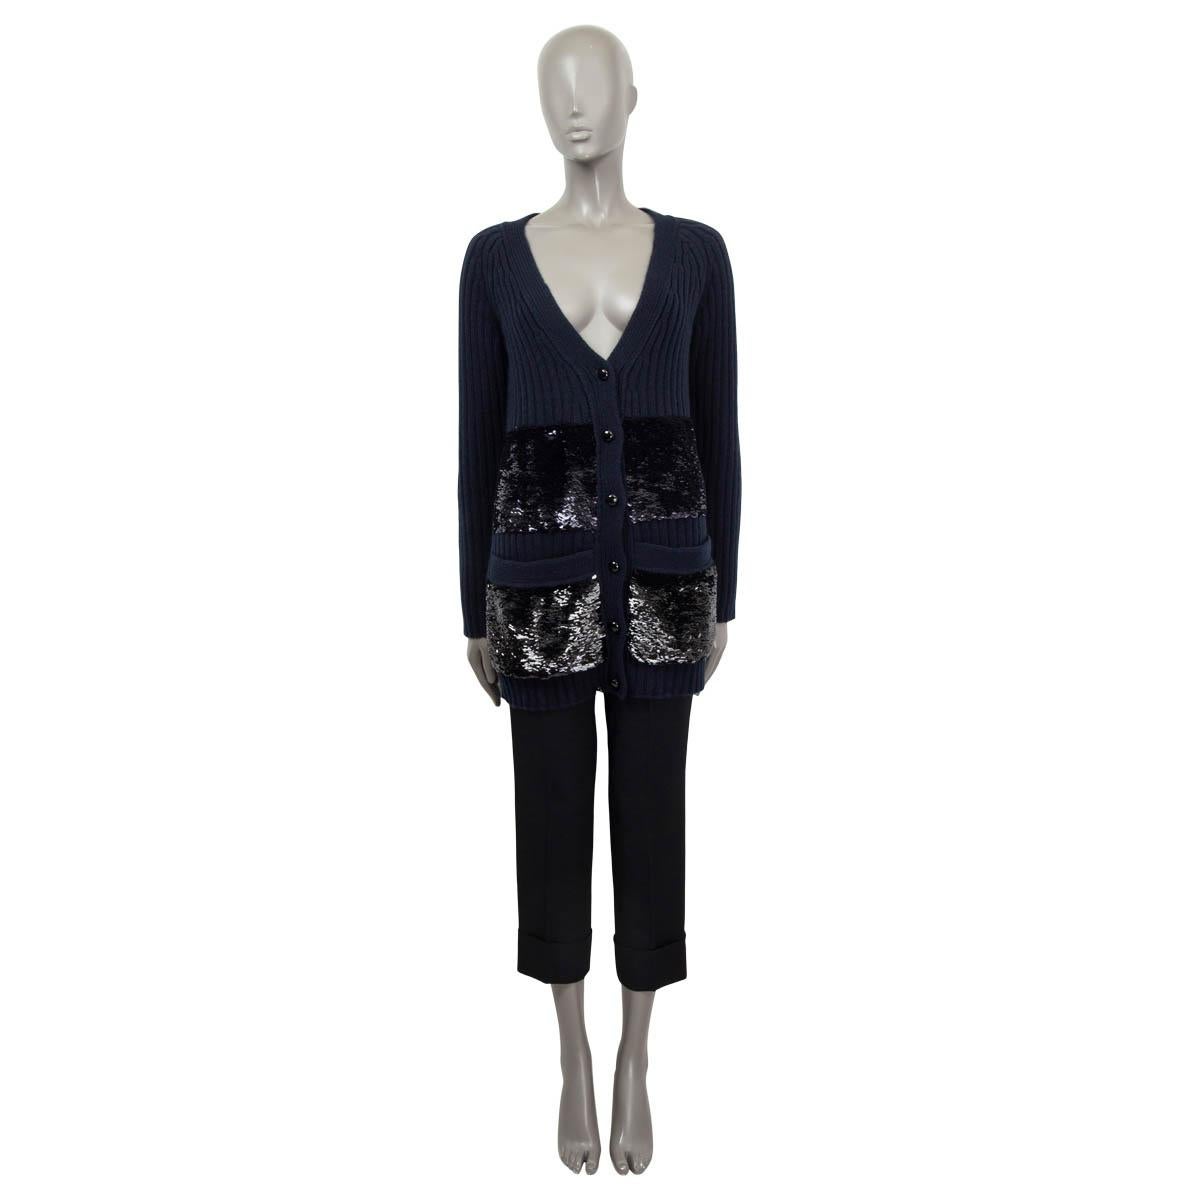 100% authentic PLouis Vuitton long cardigan in blue and black cashmere (100%). Features black sequin embellished front pockets. Closes on the front with buttons. Has been worn and is in excellent condition.

Measurements
Tag Size	S
Size	S
Shoulder